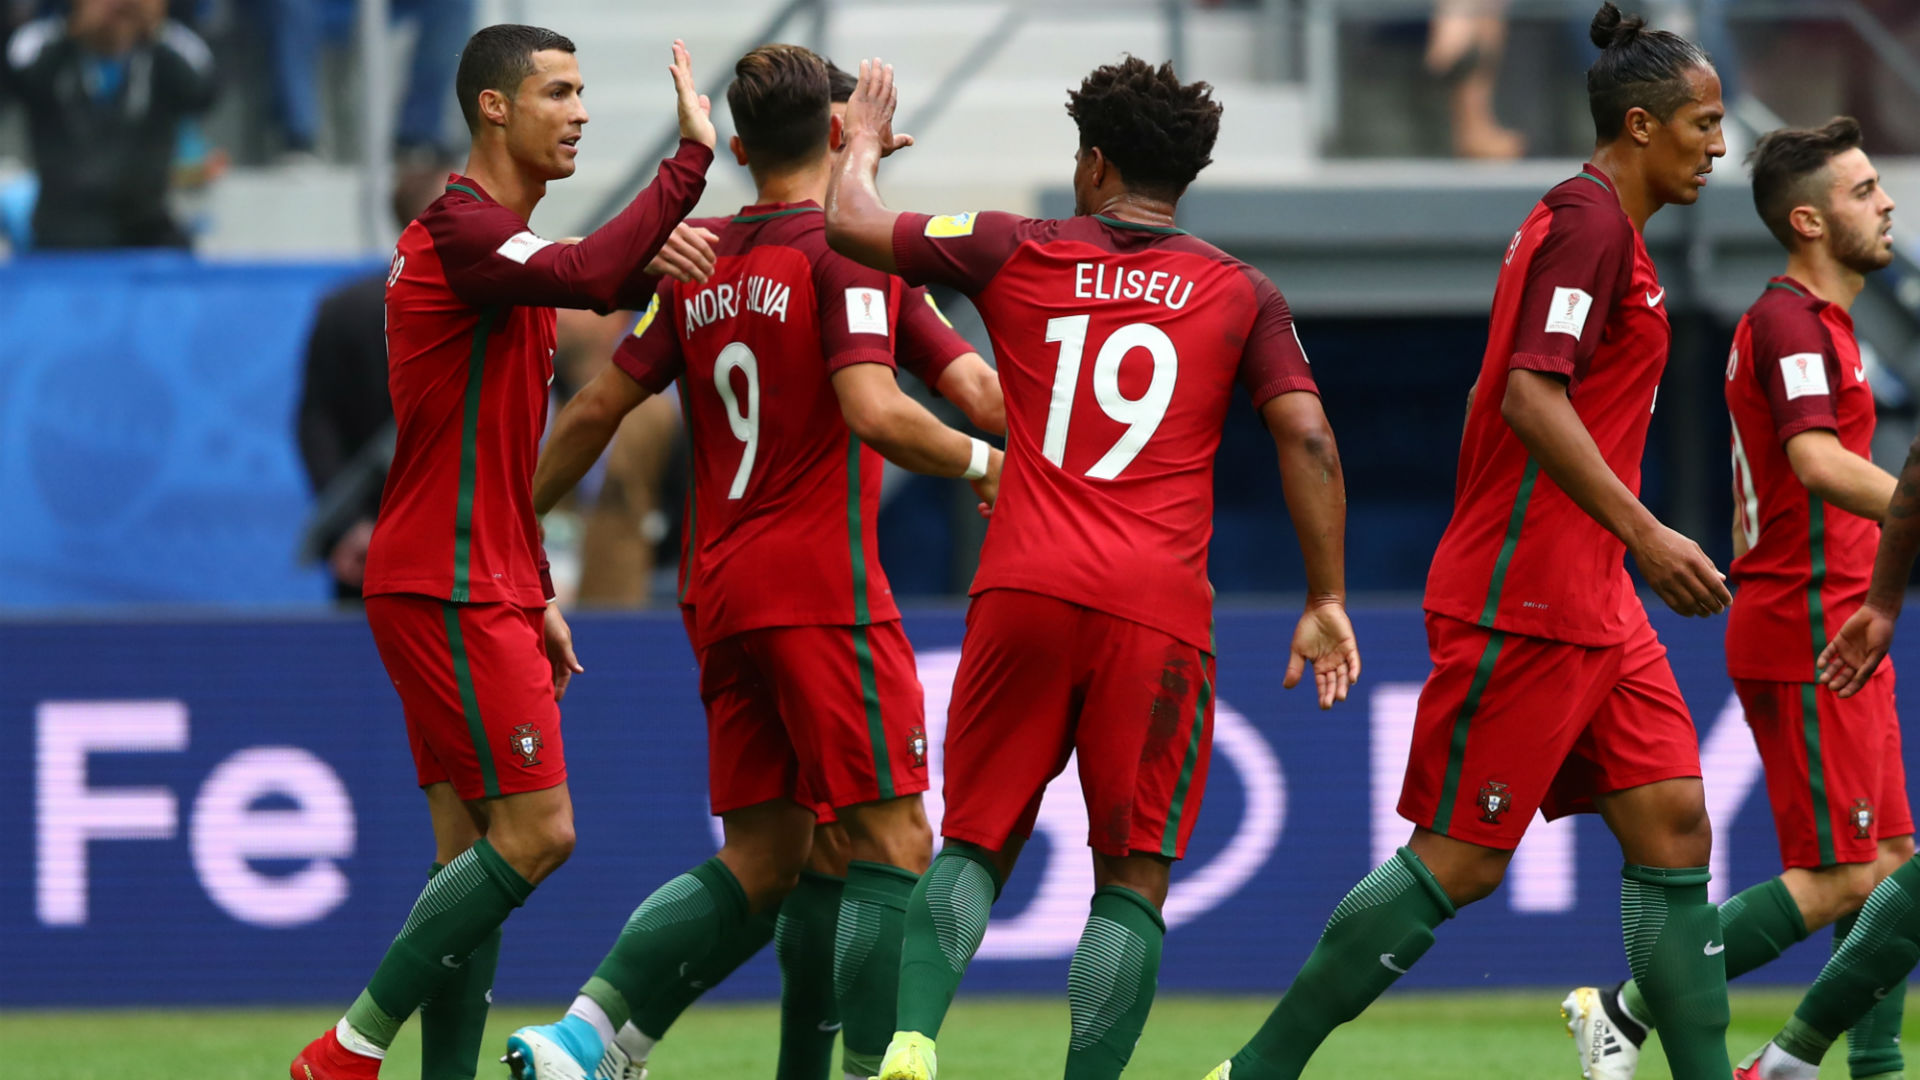 Portugal Make Easy Work Of New Zealand To Finish Atop Group A